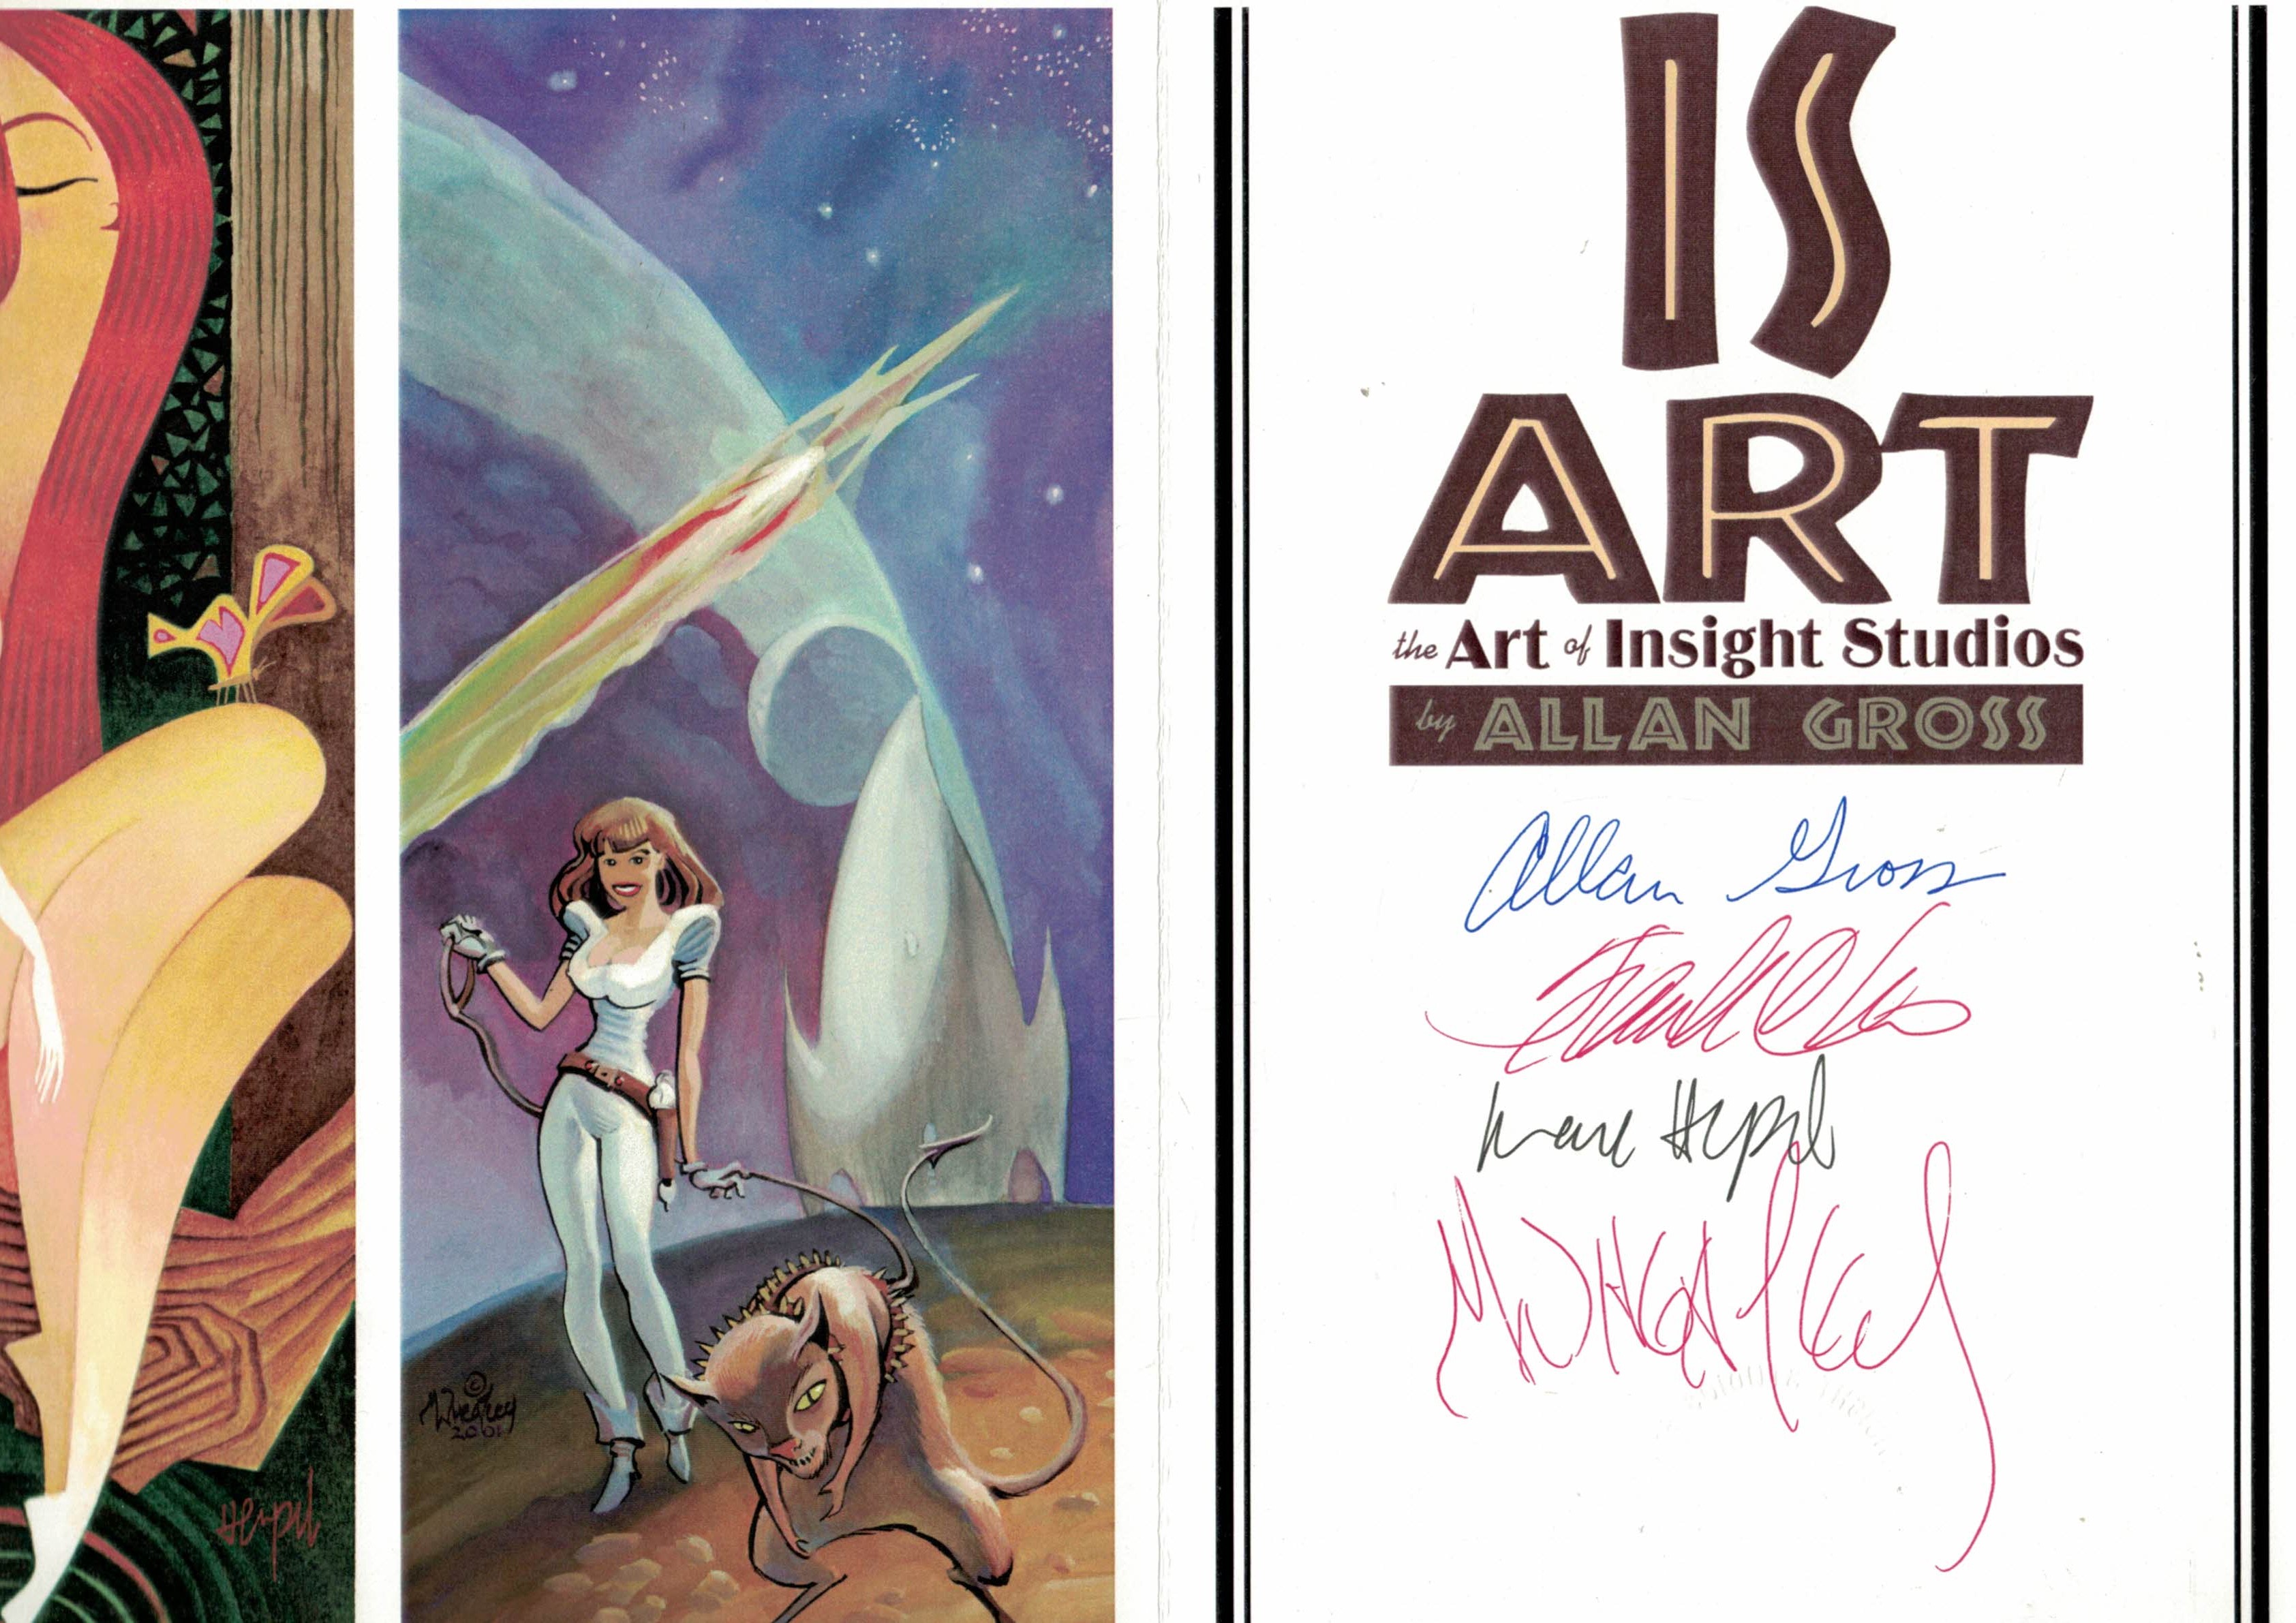 IS Art. The Art of Insight Studios. Deluxe signed edition.